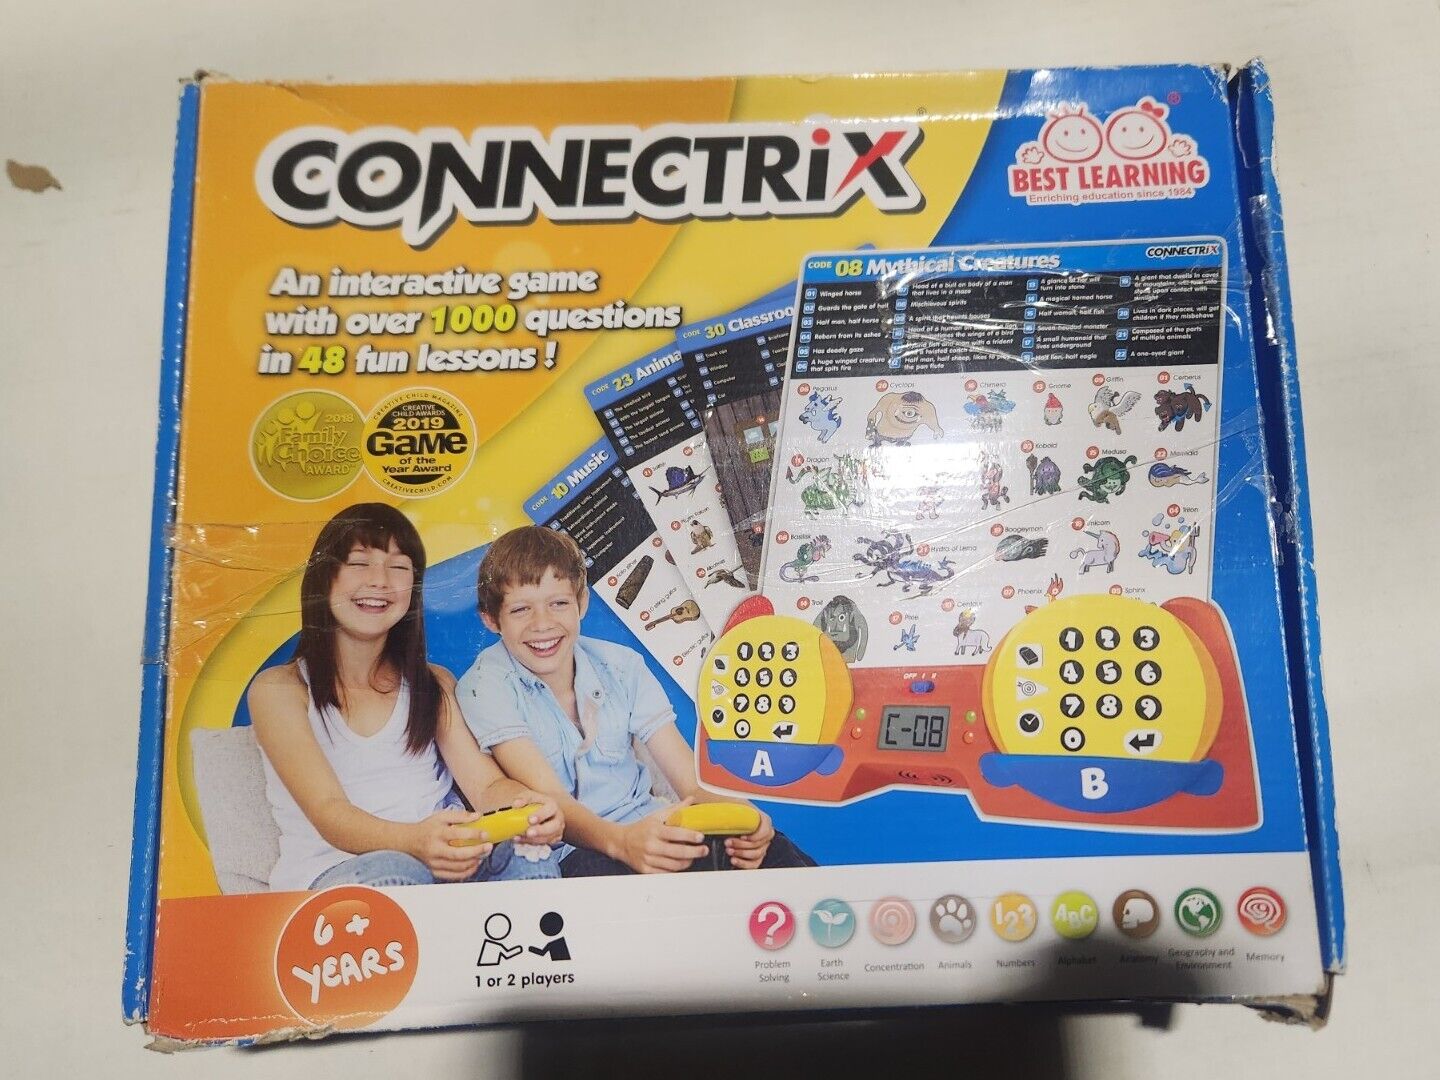 BEST LEARNING Connectrix - Exciting Educational Matching Game Toy for Kids DEAL